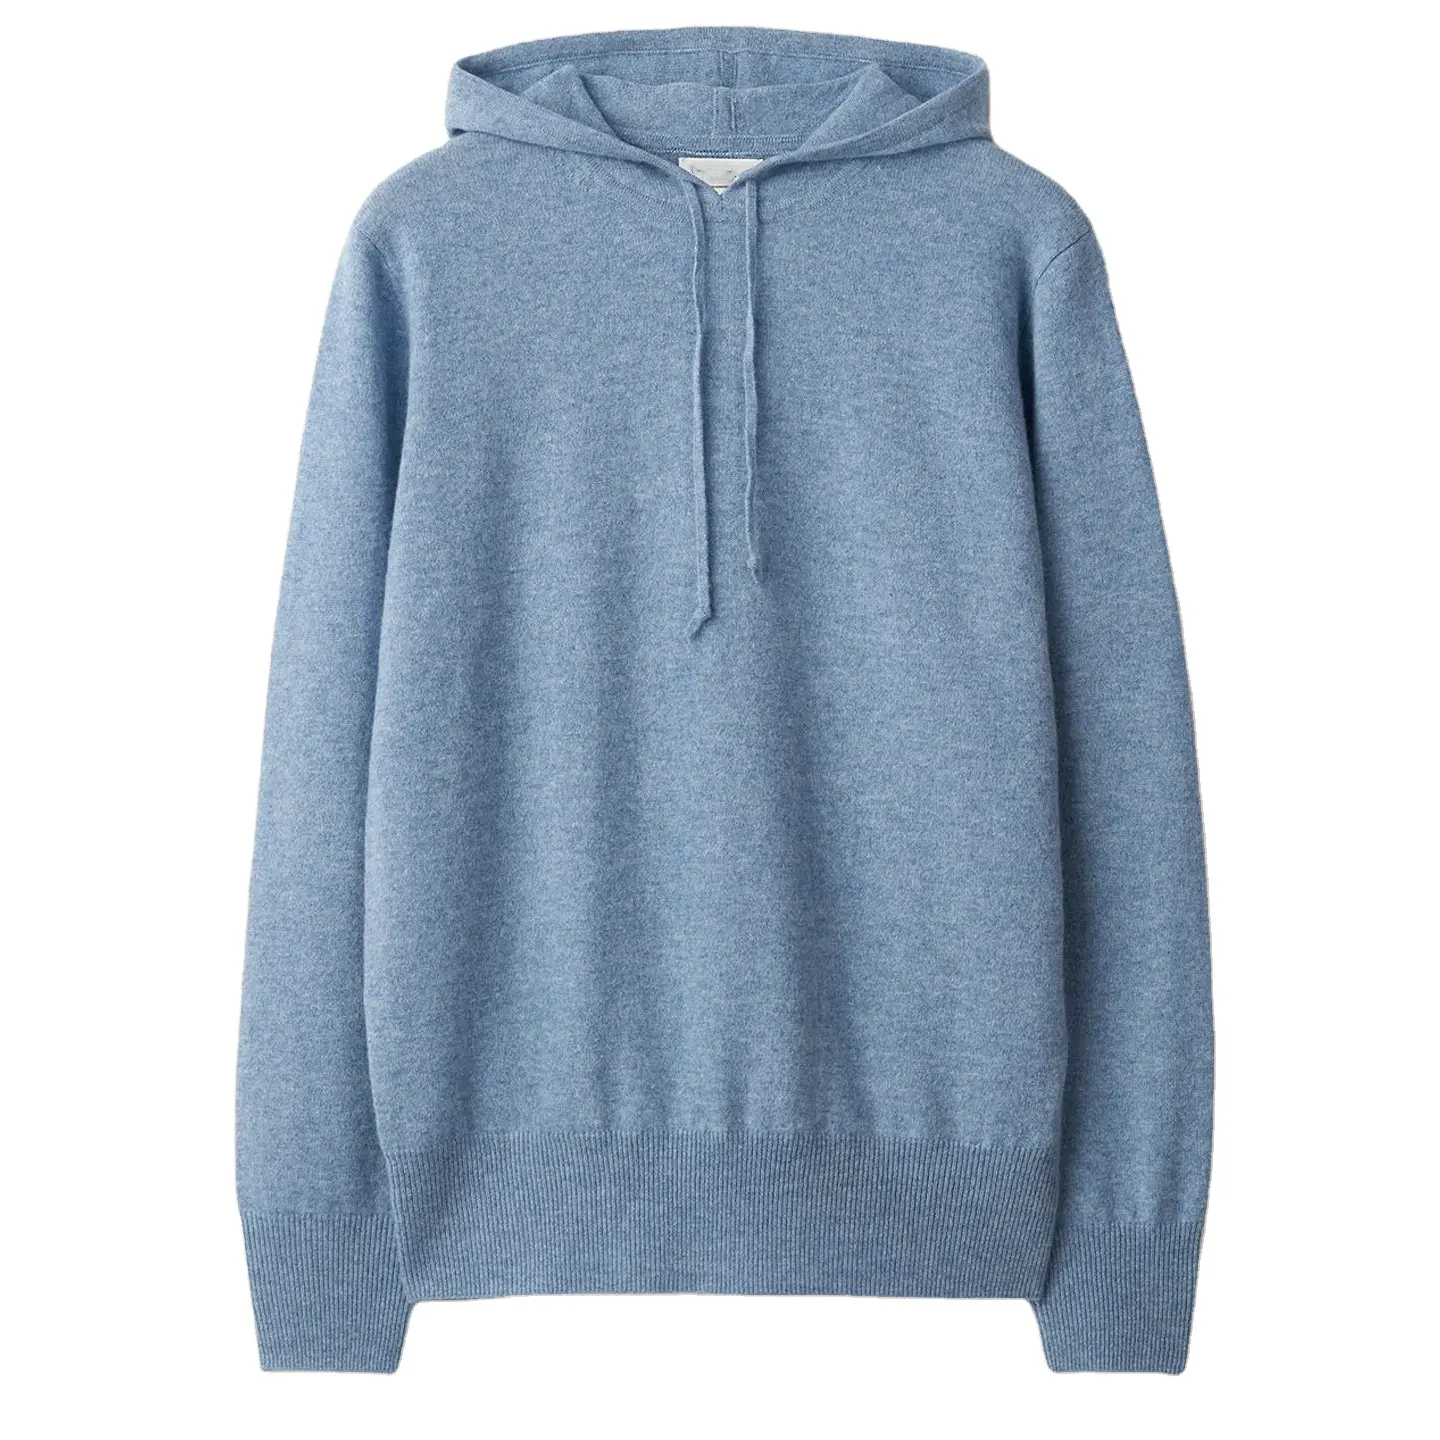 Casual and comfortable cashmere men hoodie